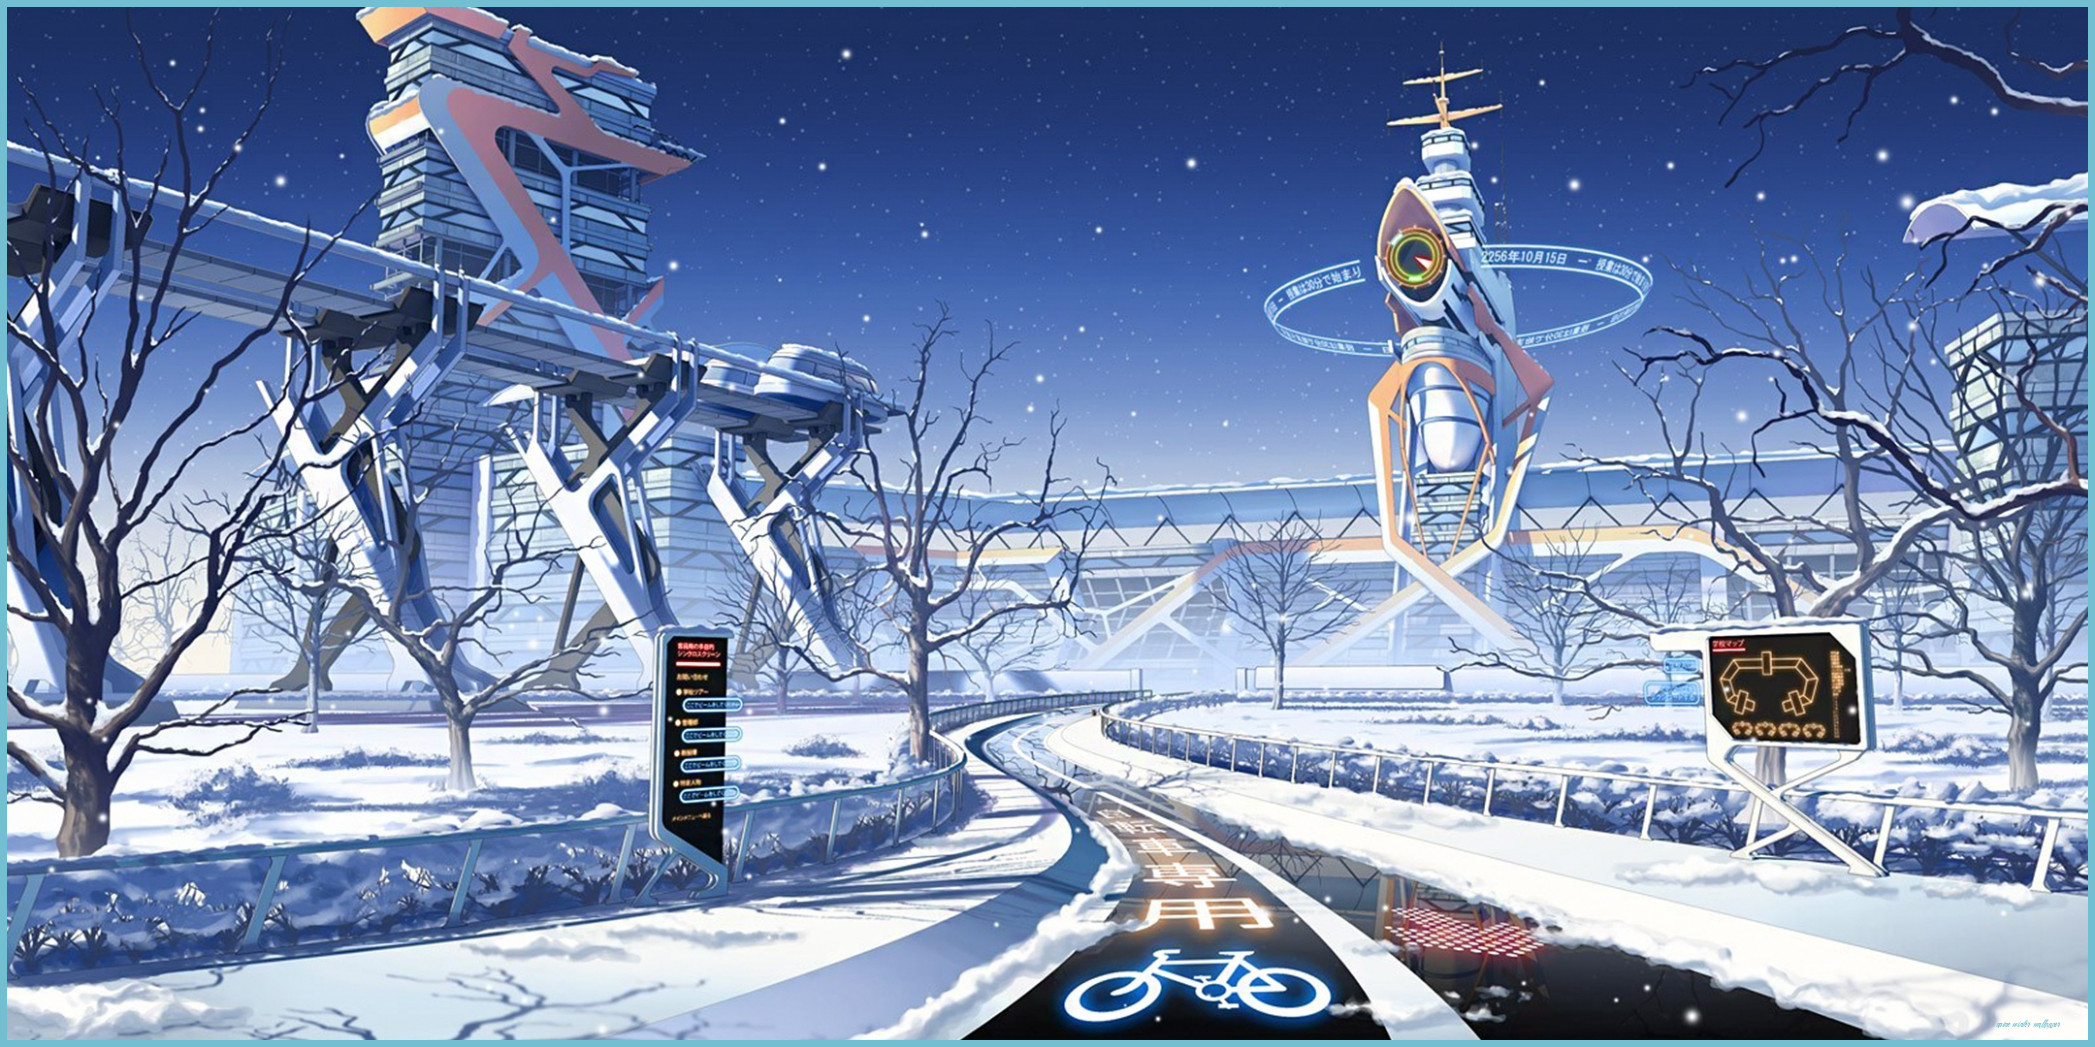 Doubts About Anime Winter Wallpaper You Should Clarify. Anime Winter Wallpaper